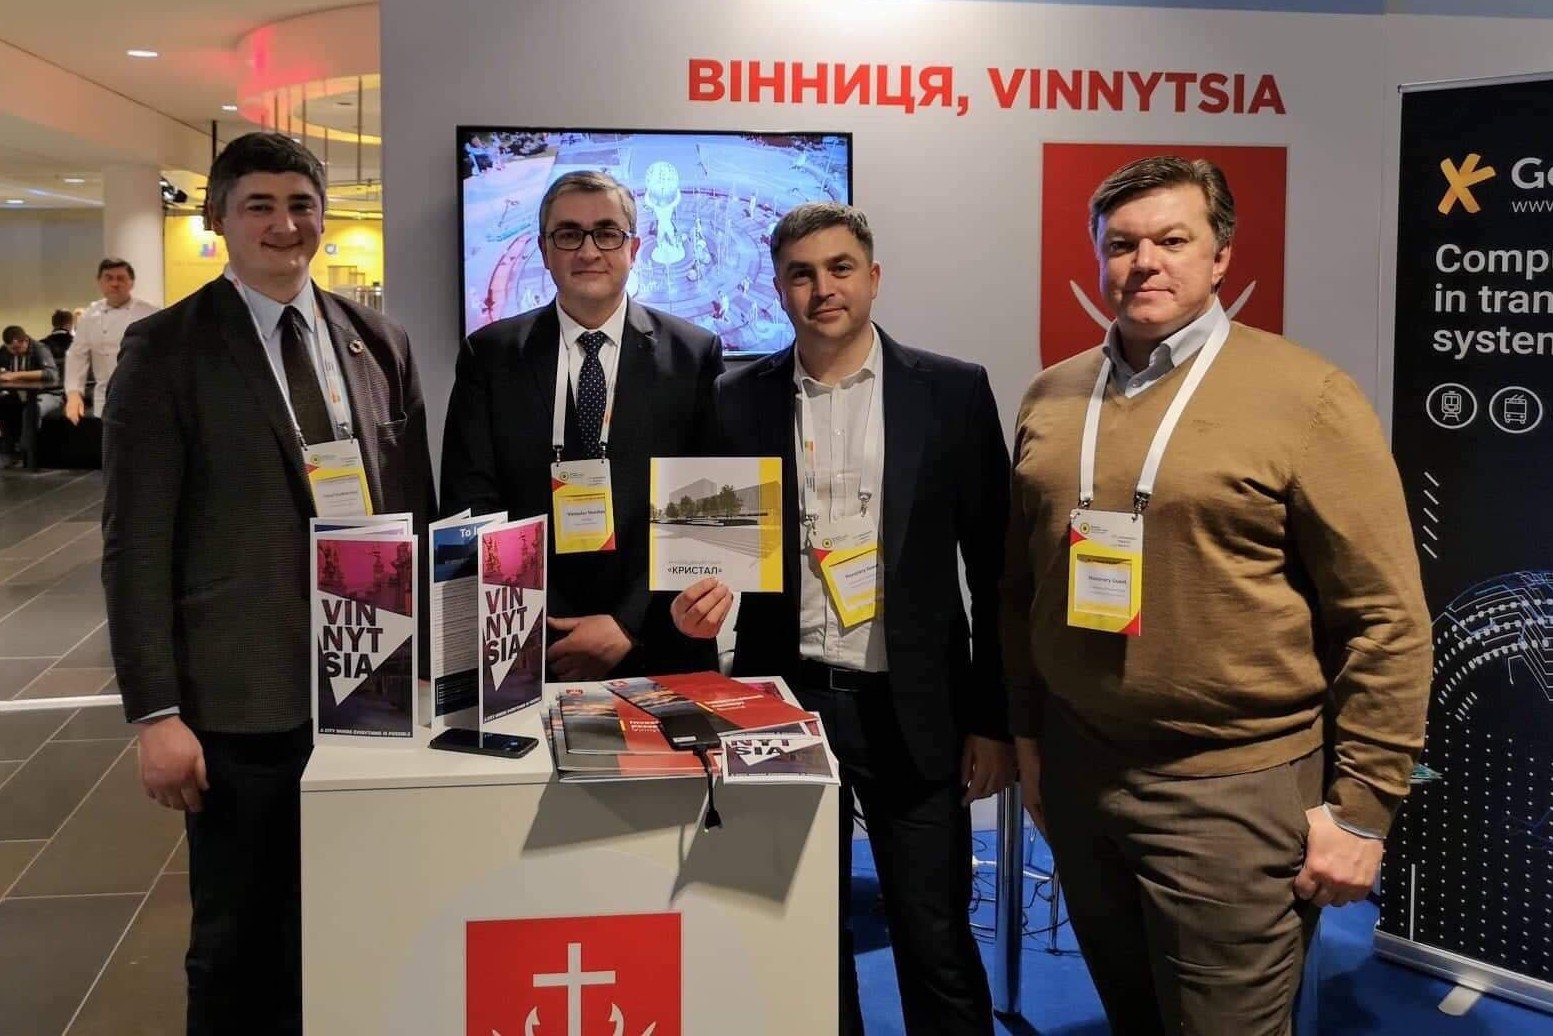 Vinnytsia’s projects were presented at the International EXPO Congress